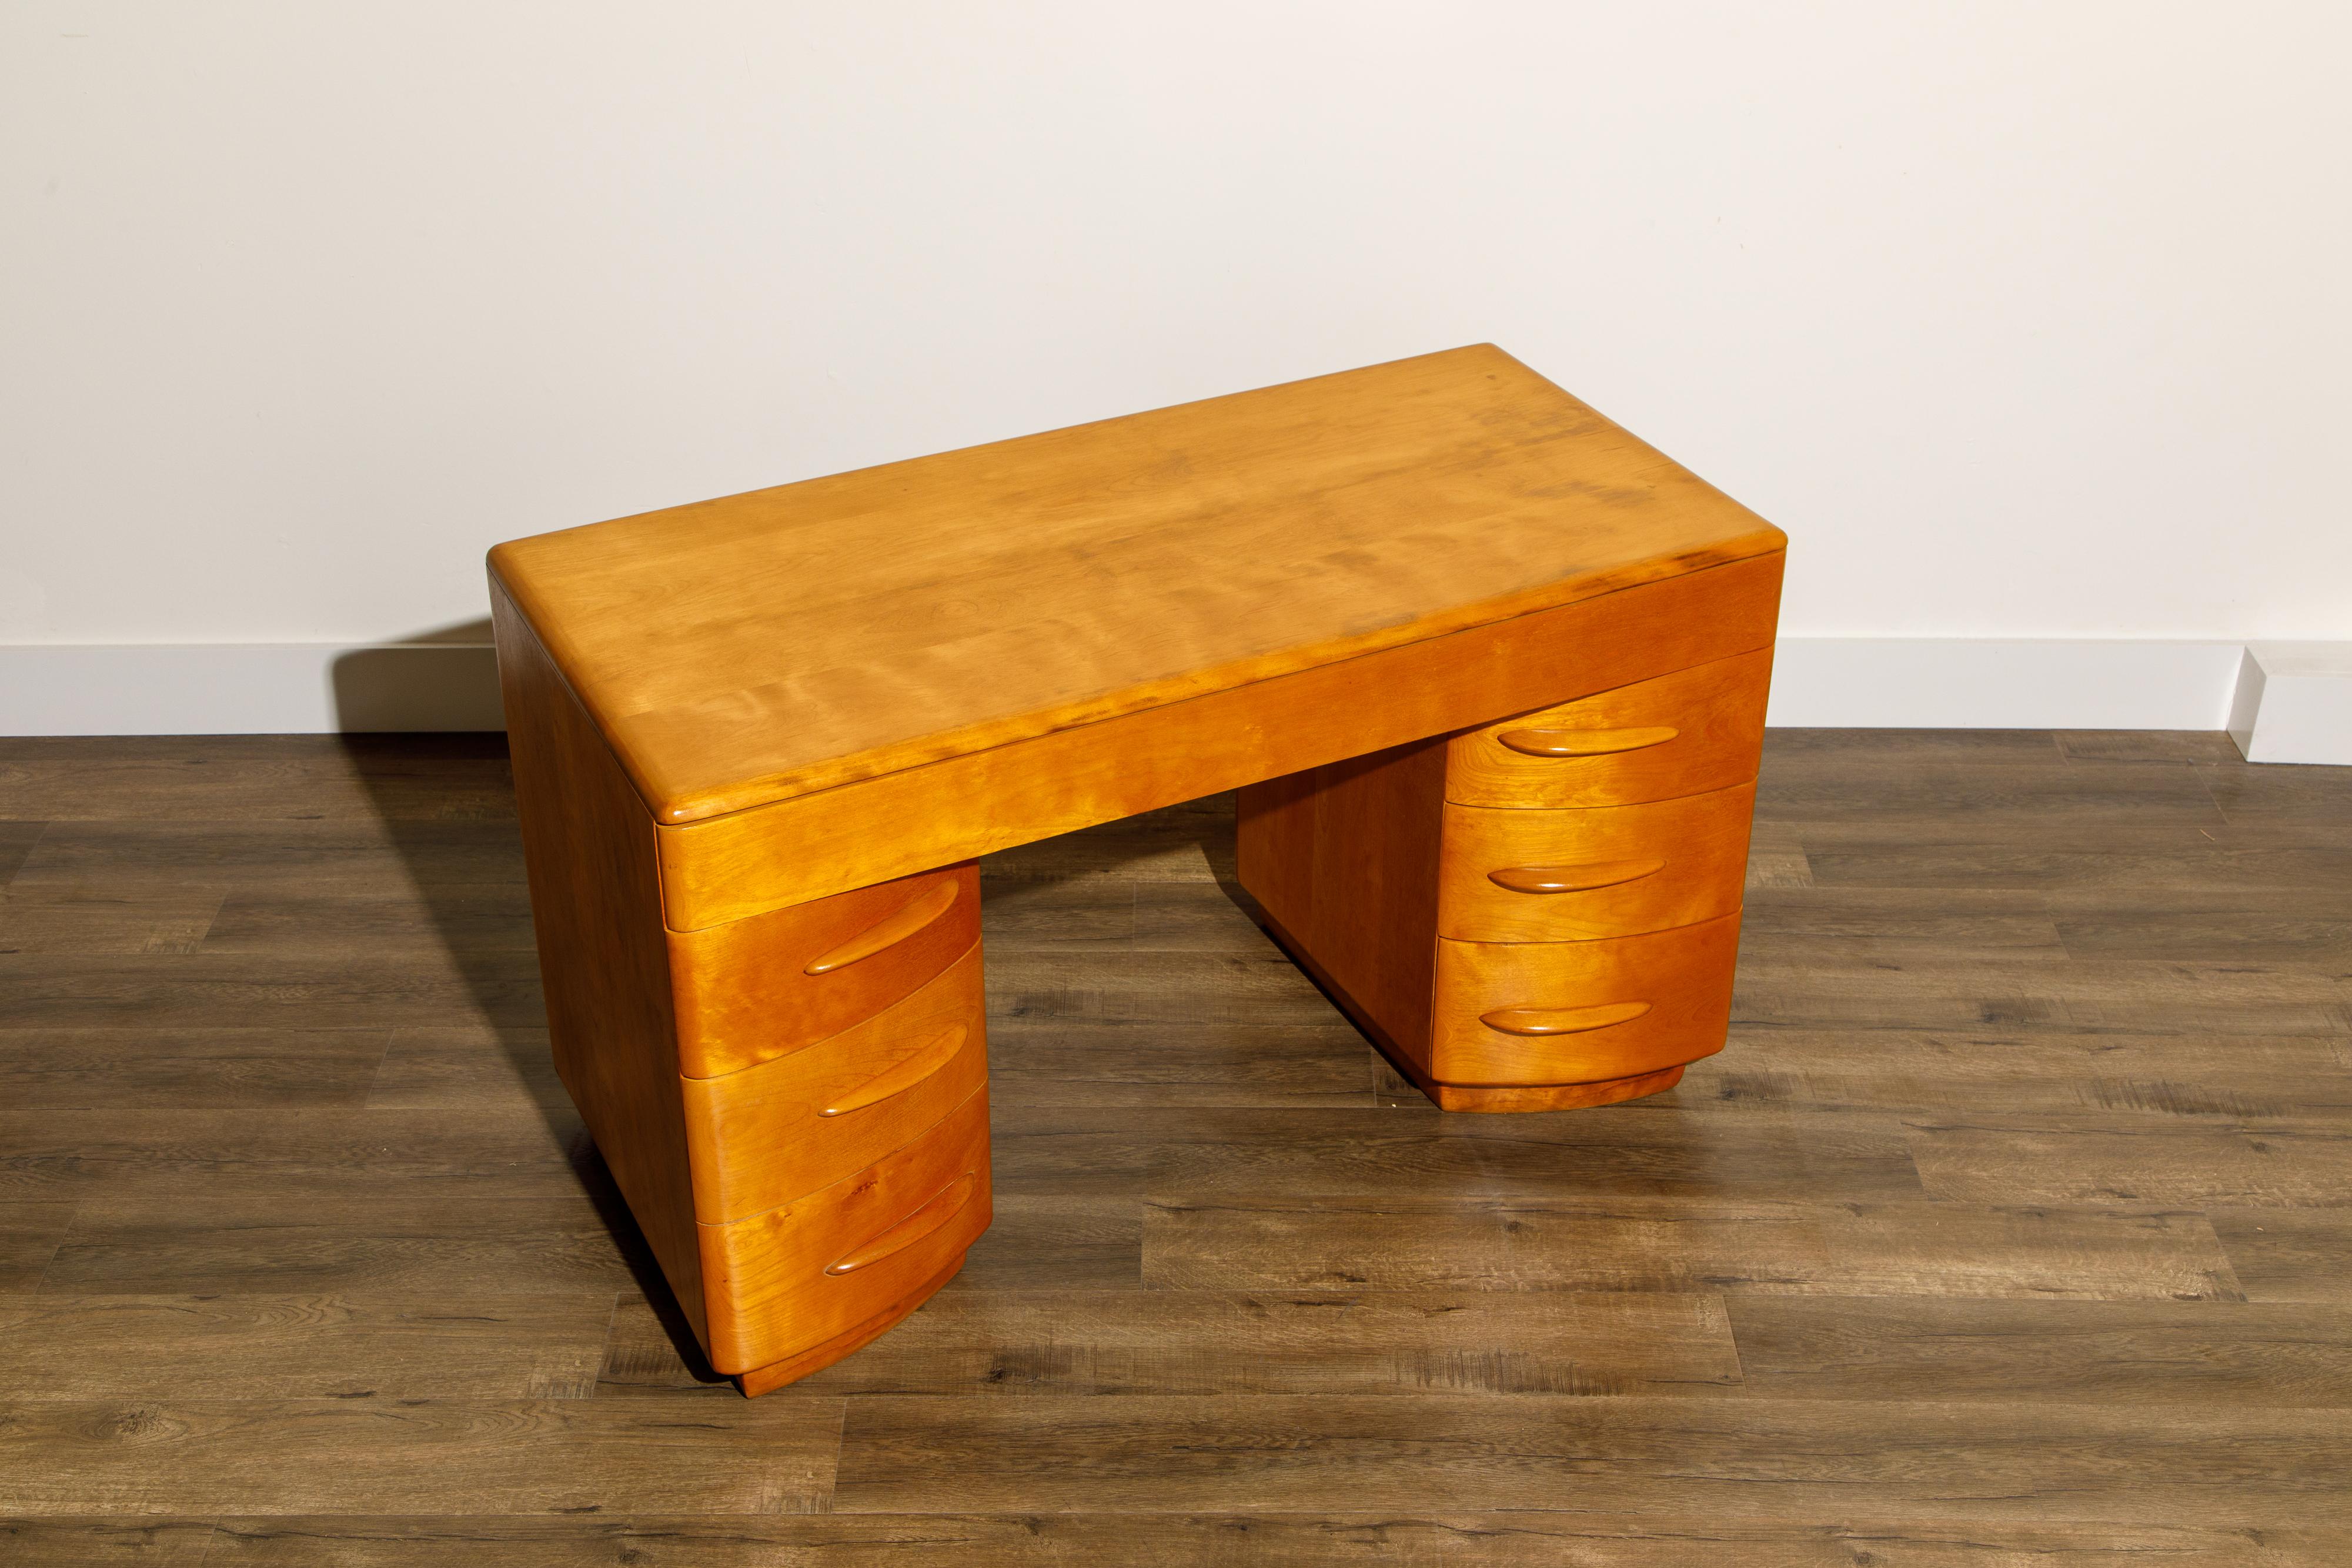 American Kneehole Desk by Count Alexis de Sakhoffsky for Heywood Wakefield, 1940s, Signed